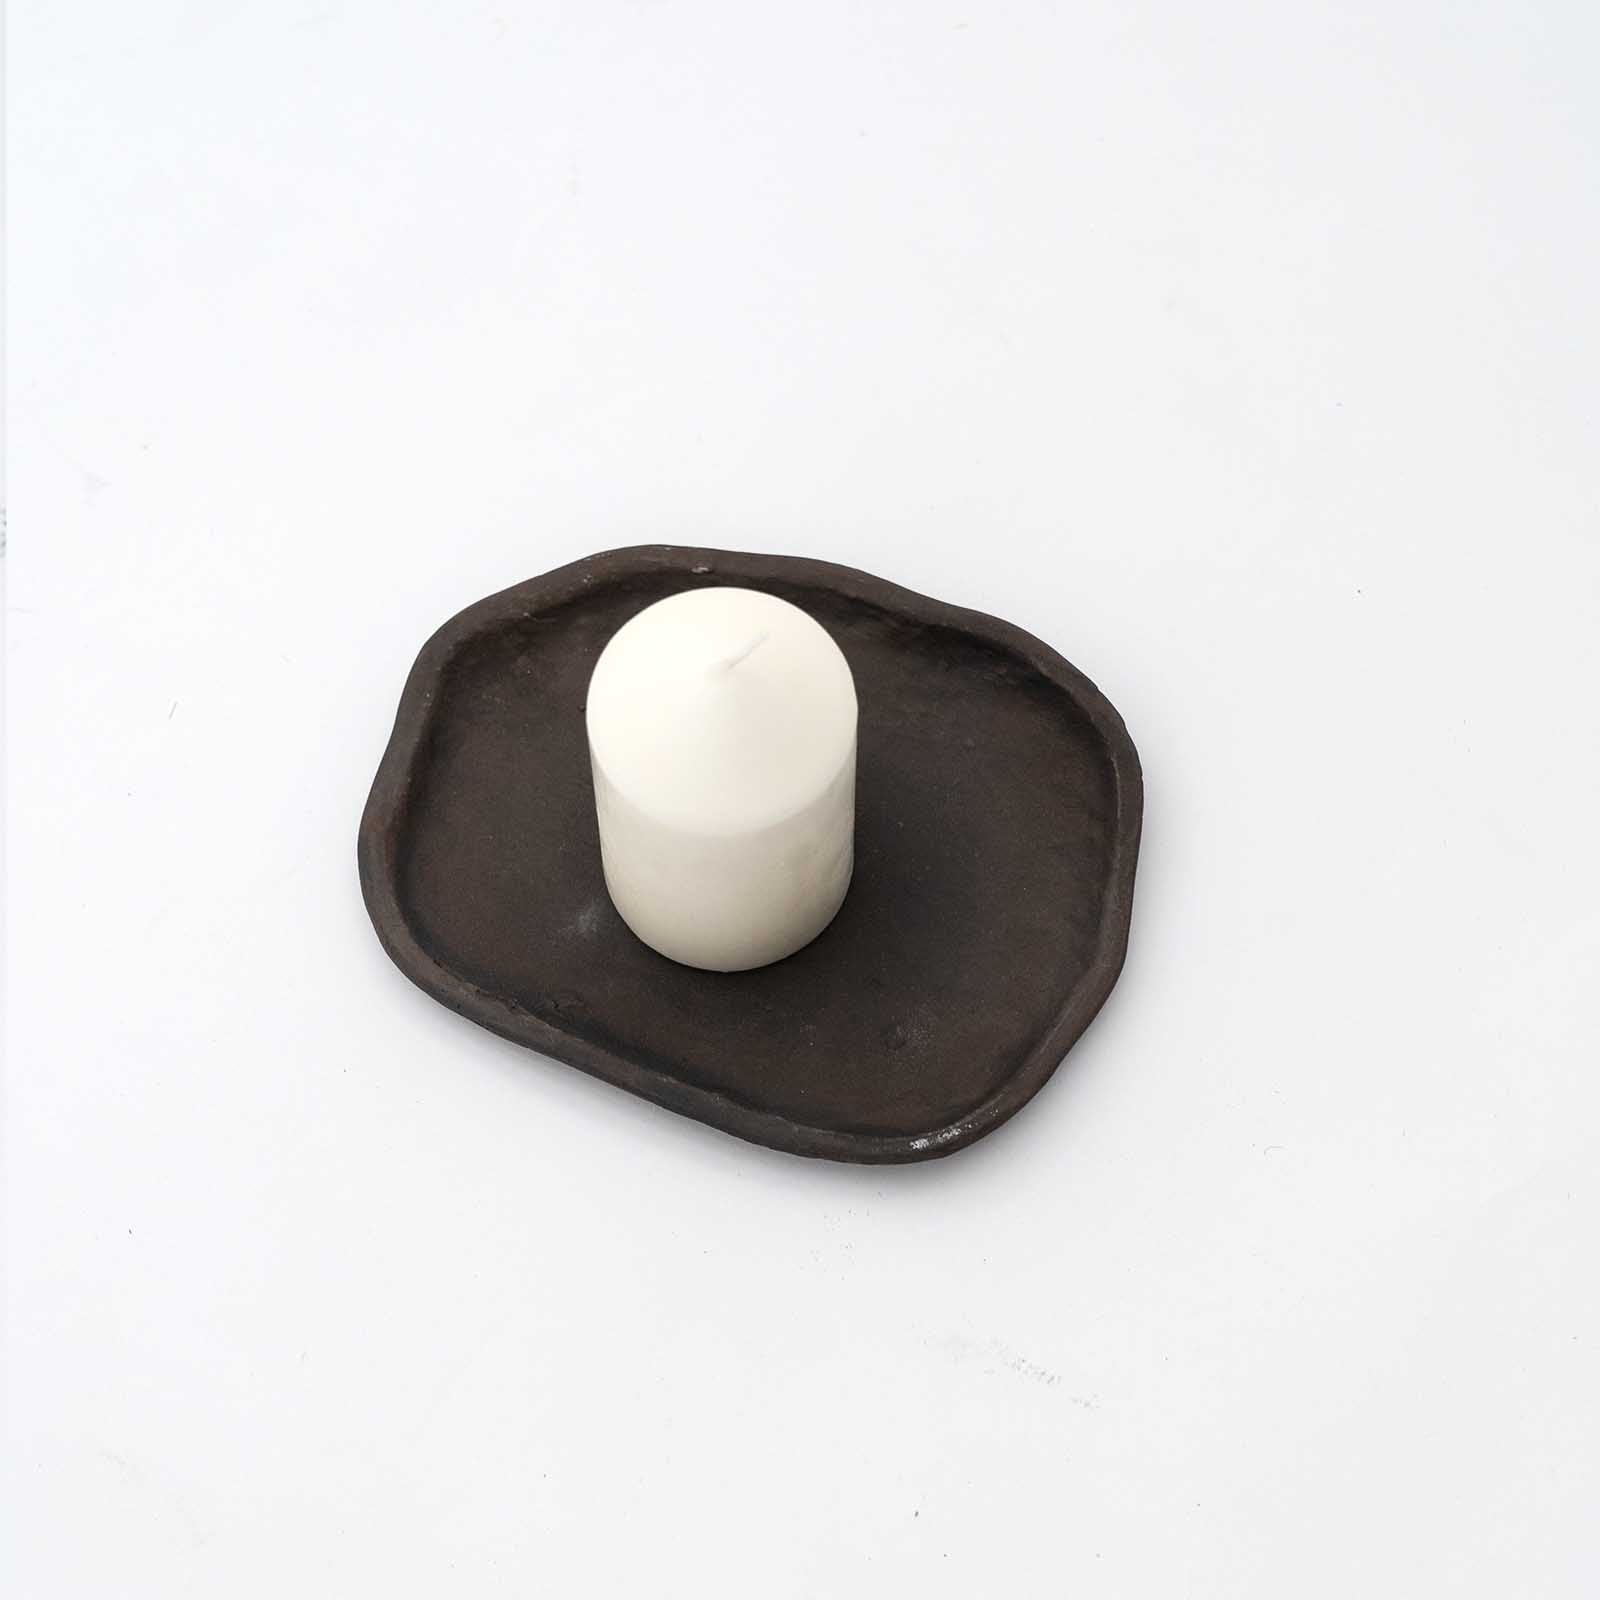 Candle Plates  - WS Living - UAE - Accesories Wood and steel Furnitures - Dubai